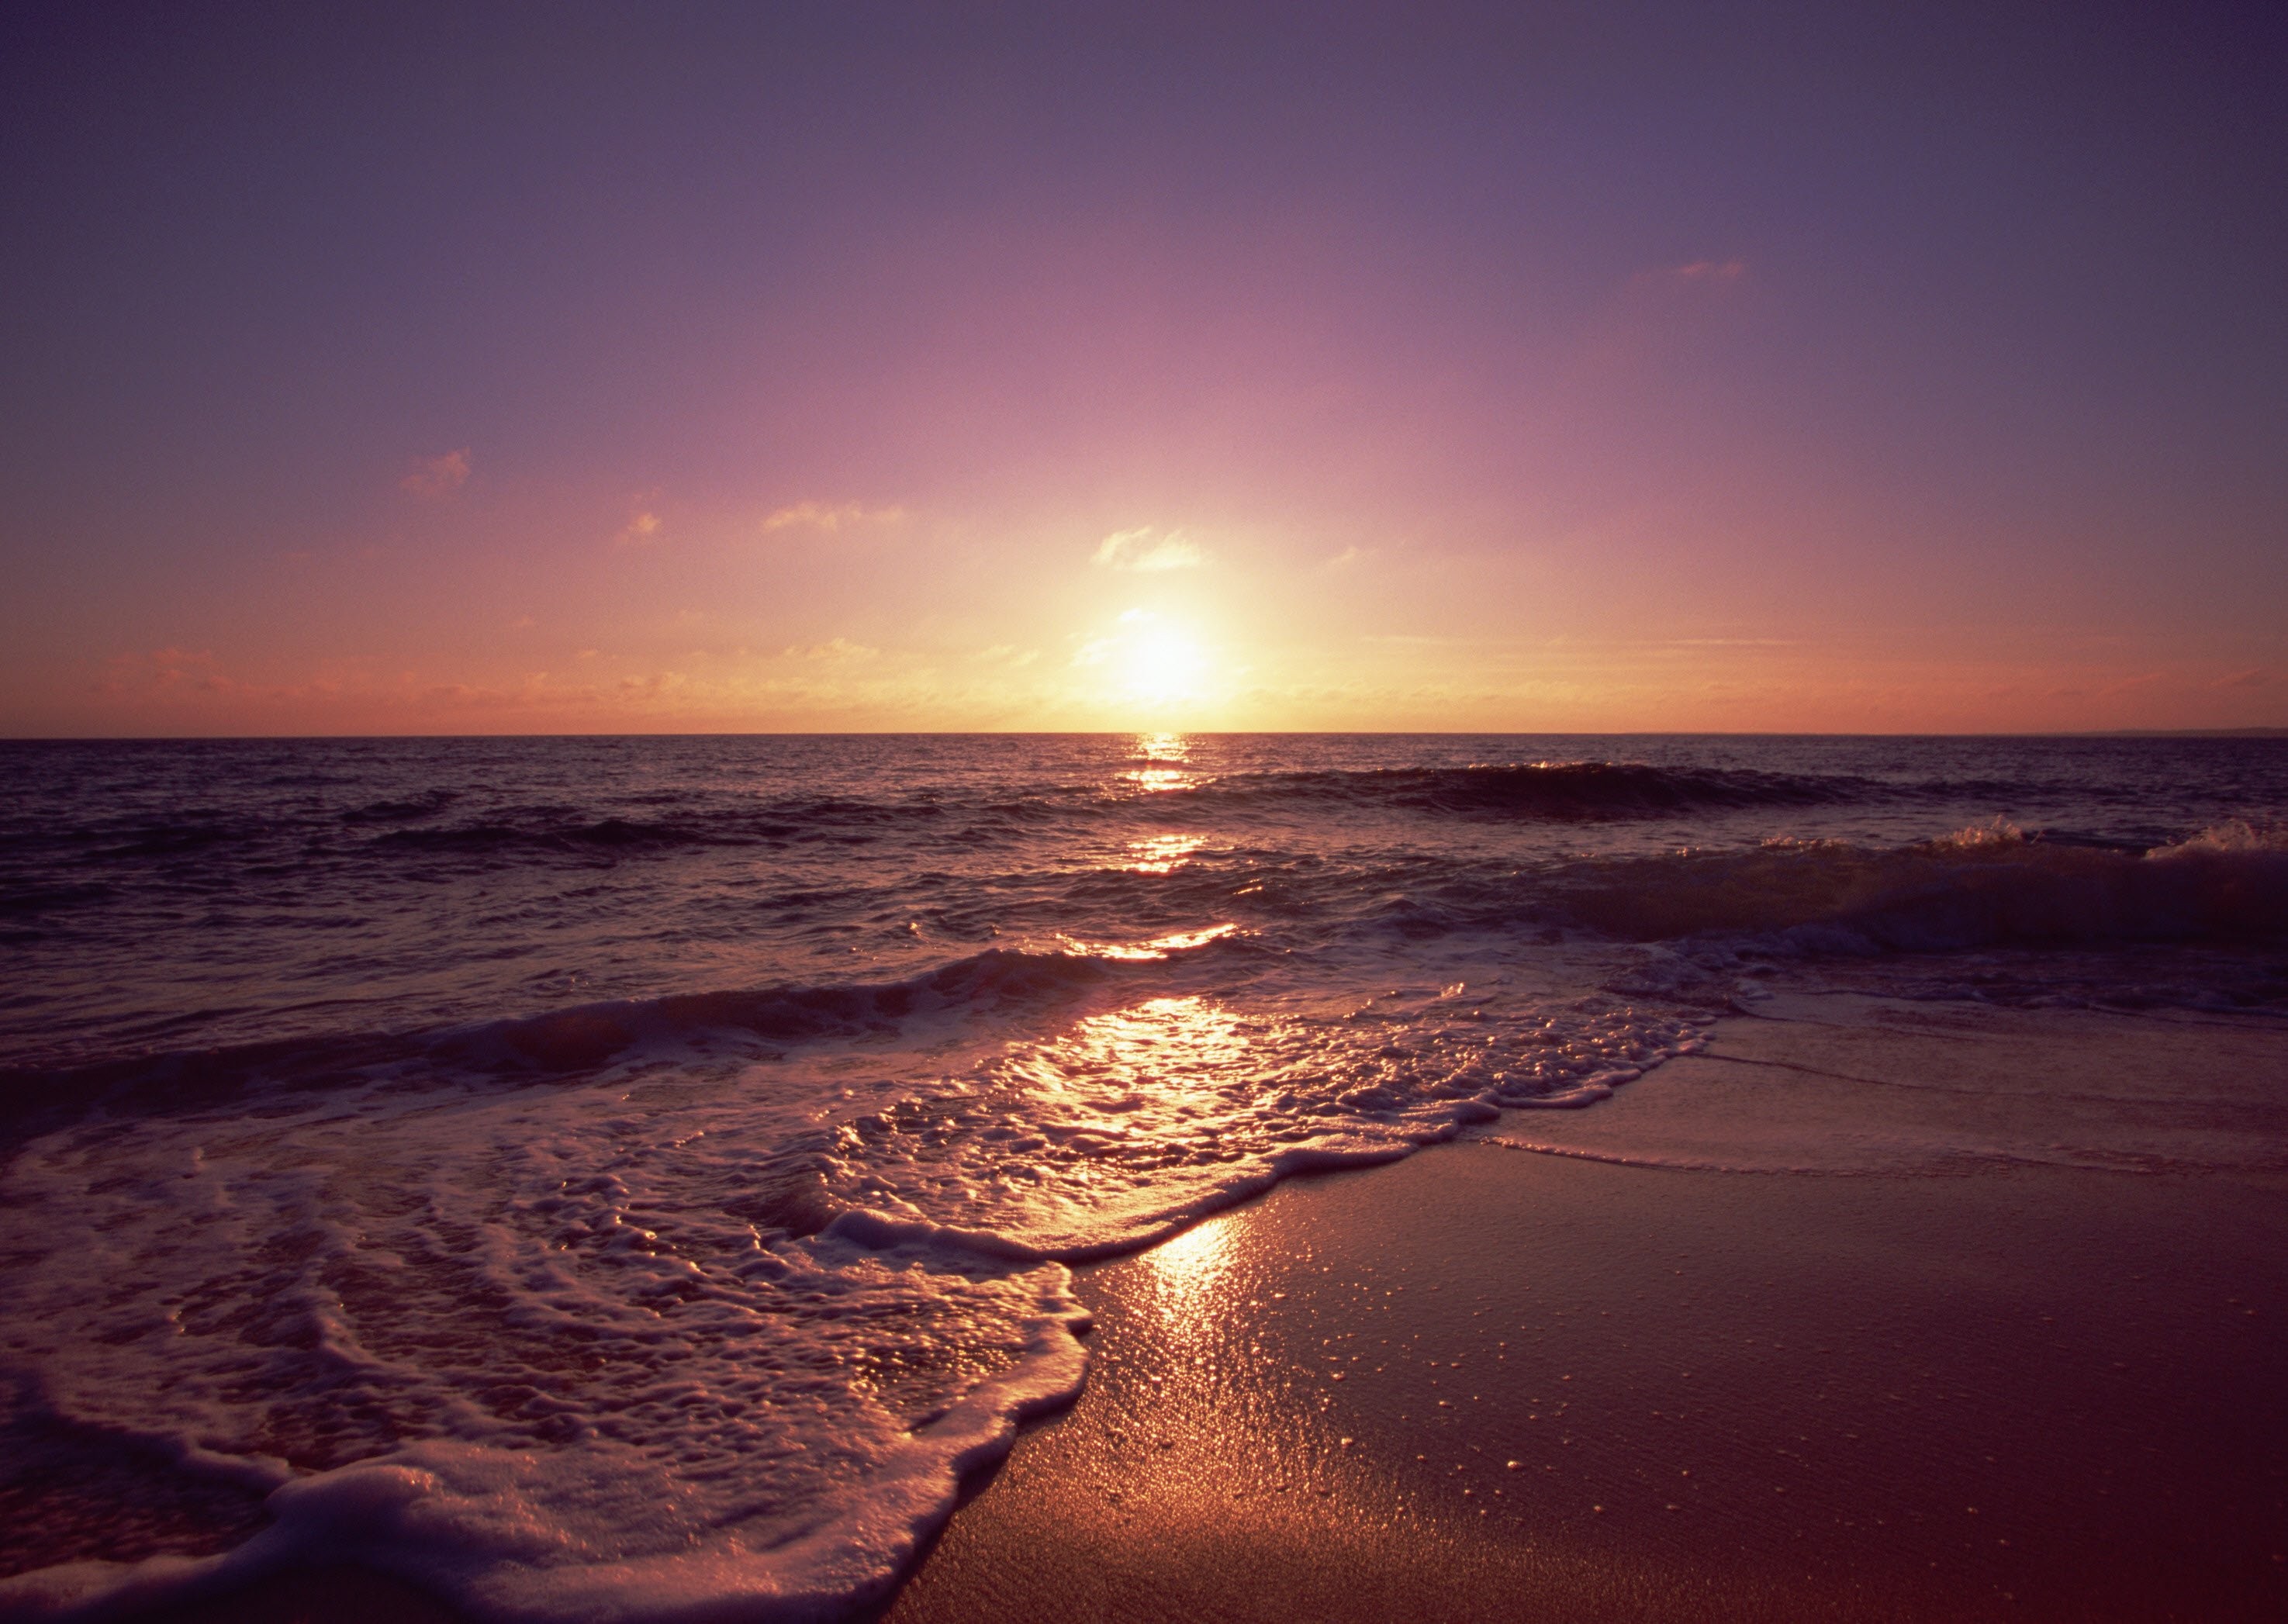 Sea Shore And Sunset Wallpapers